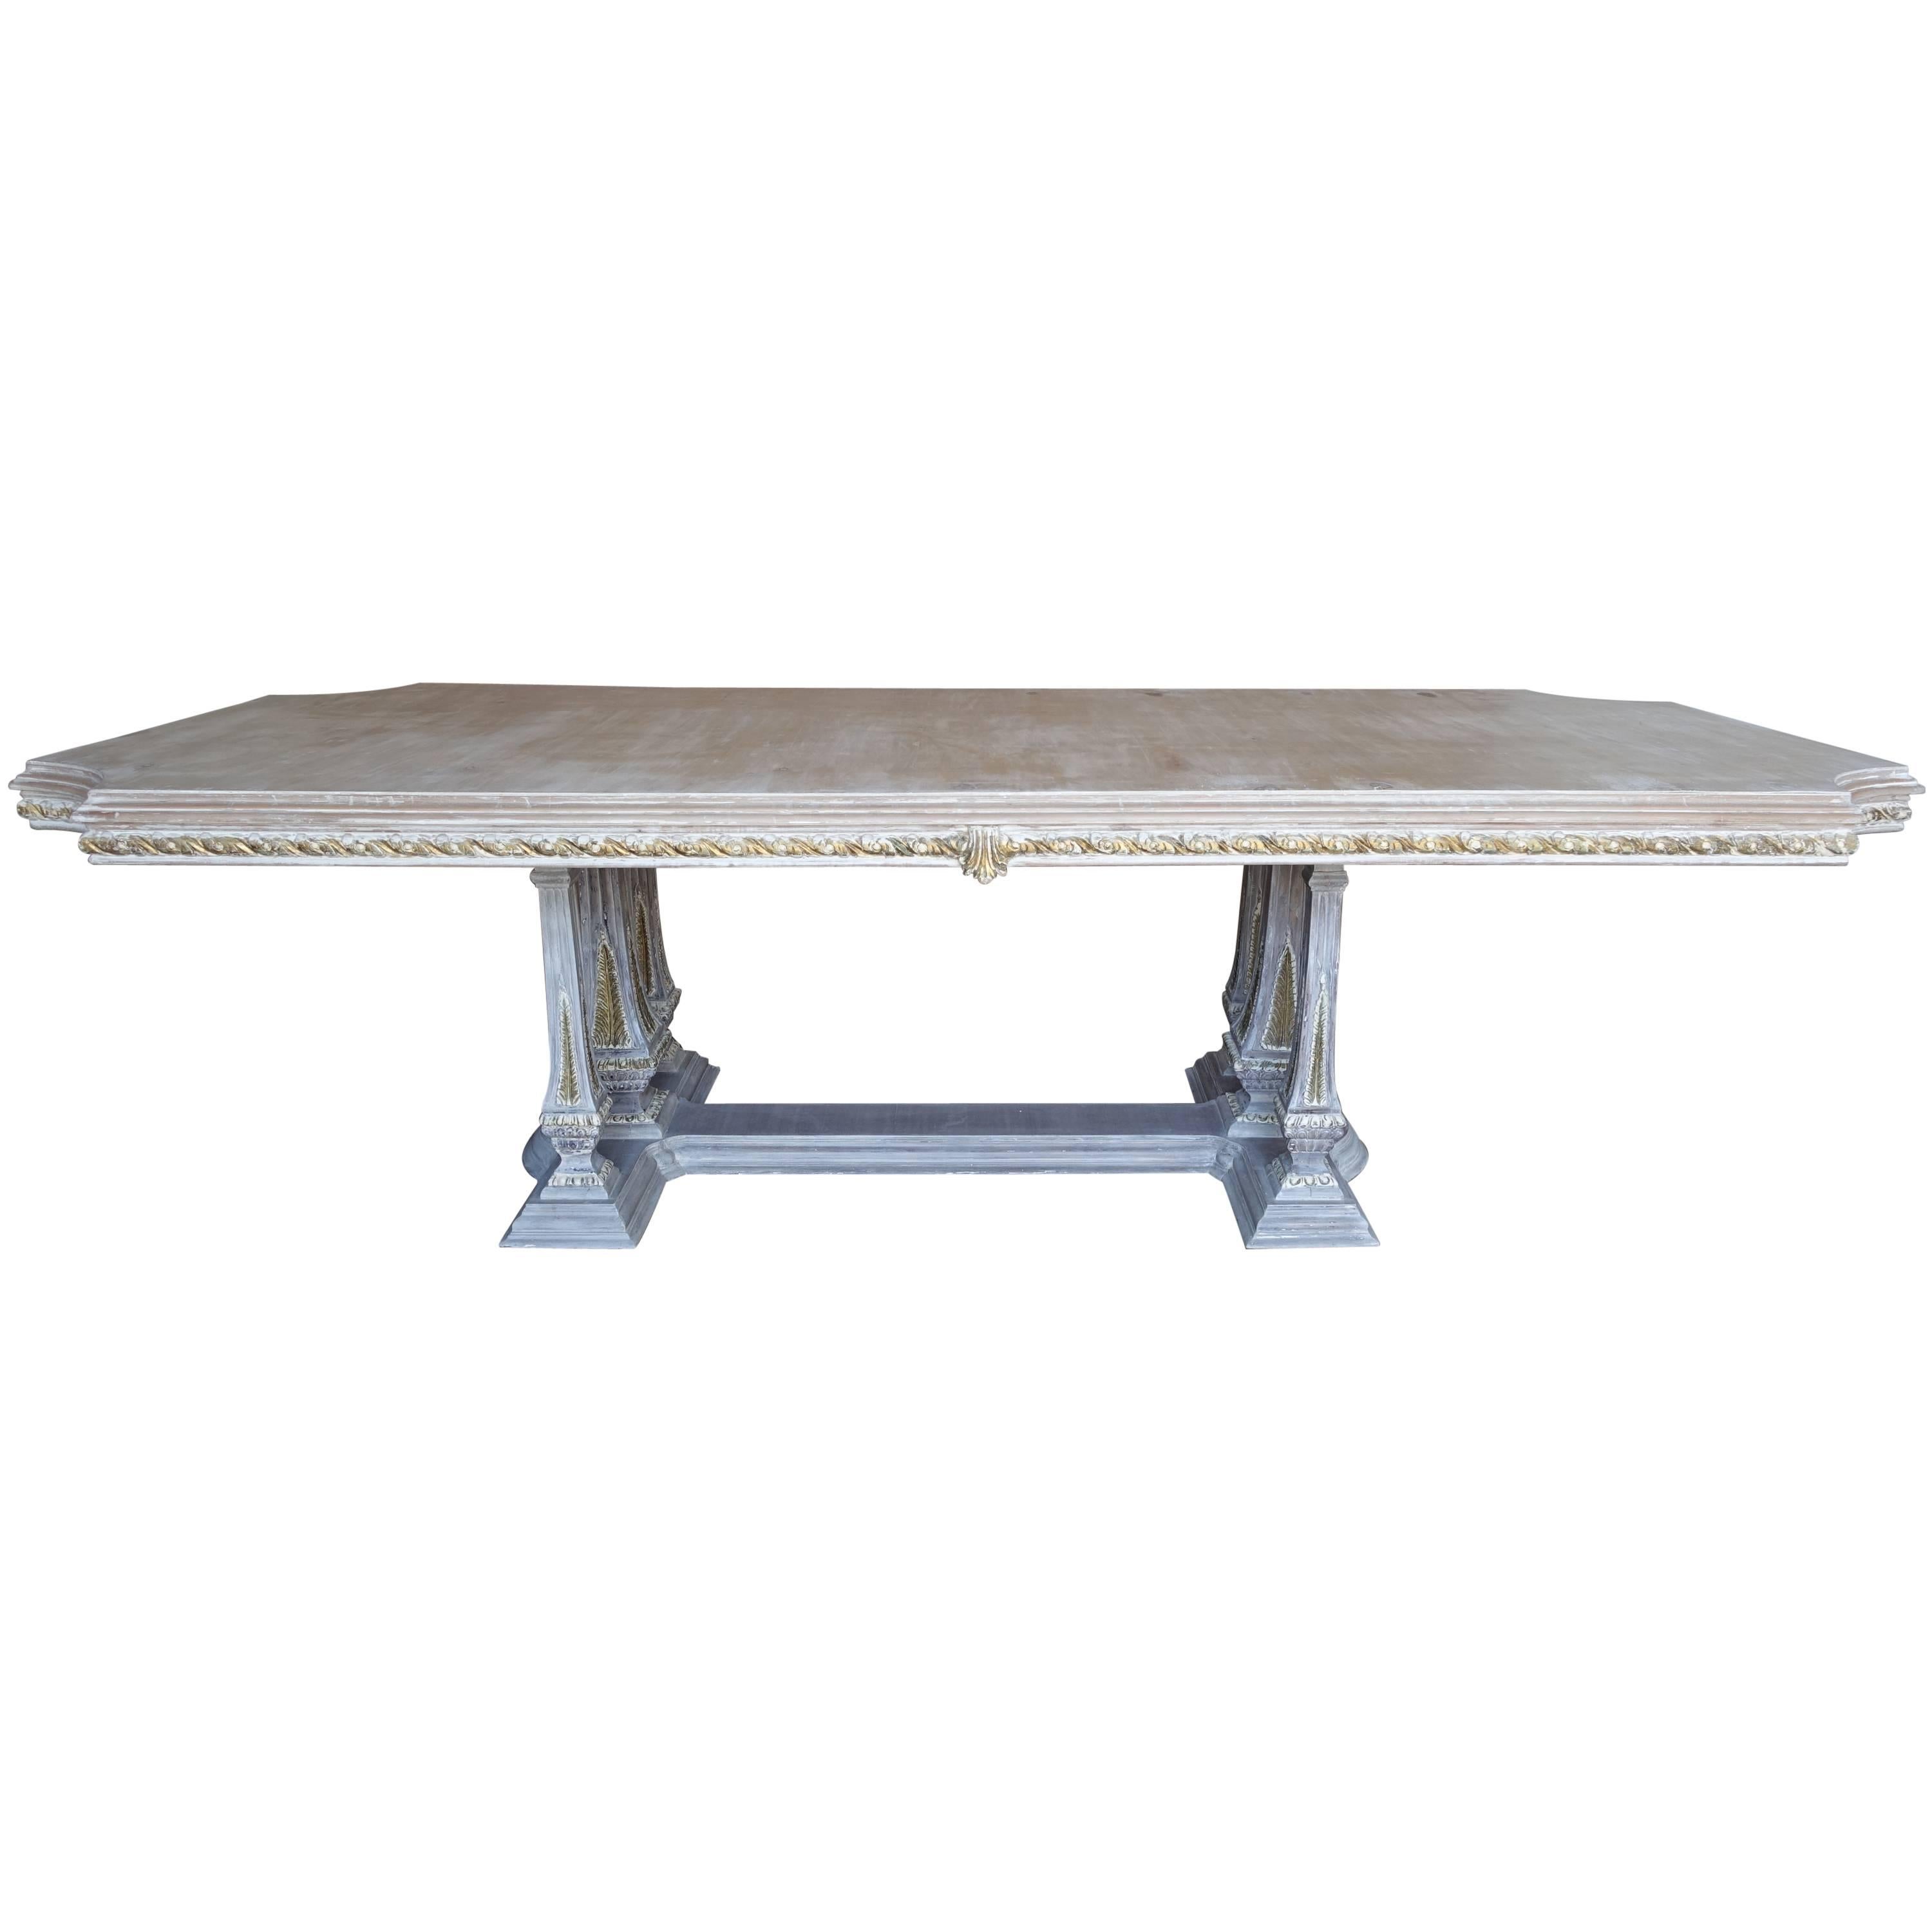 Italian Neoclassical Style Carved Dining Table, circa 1940